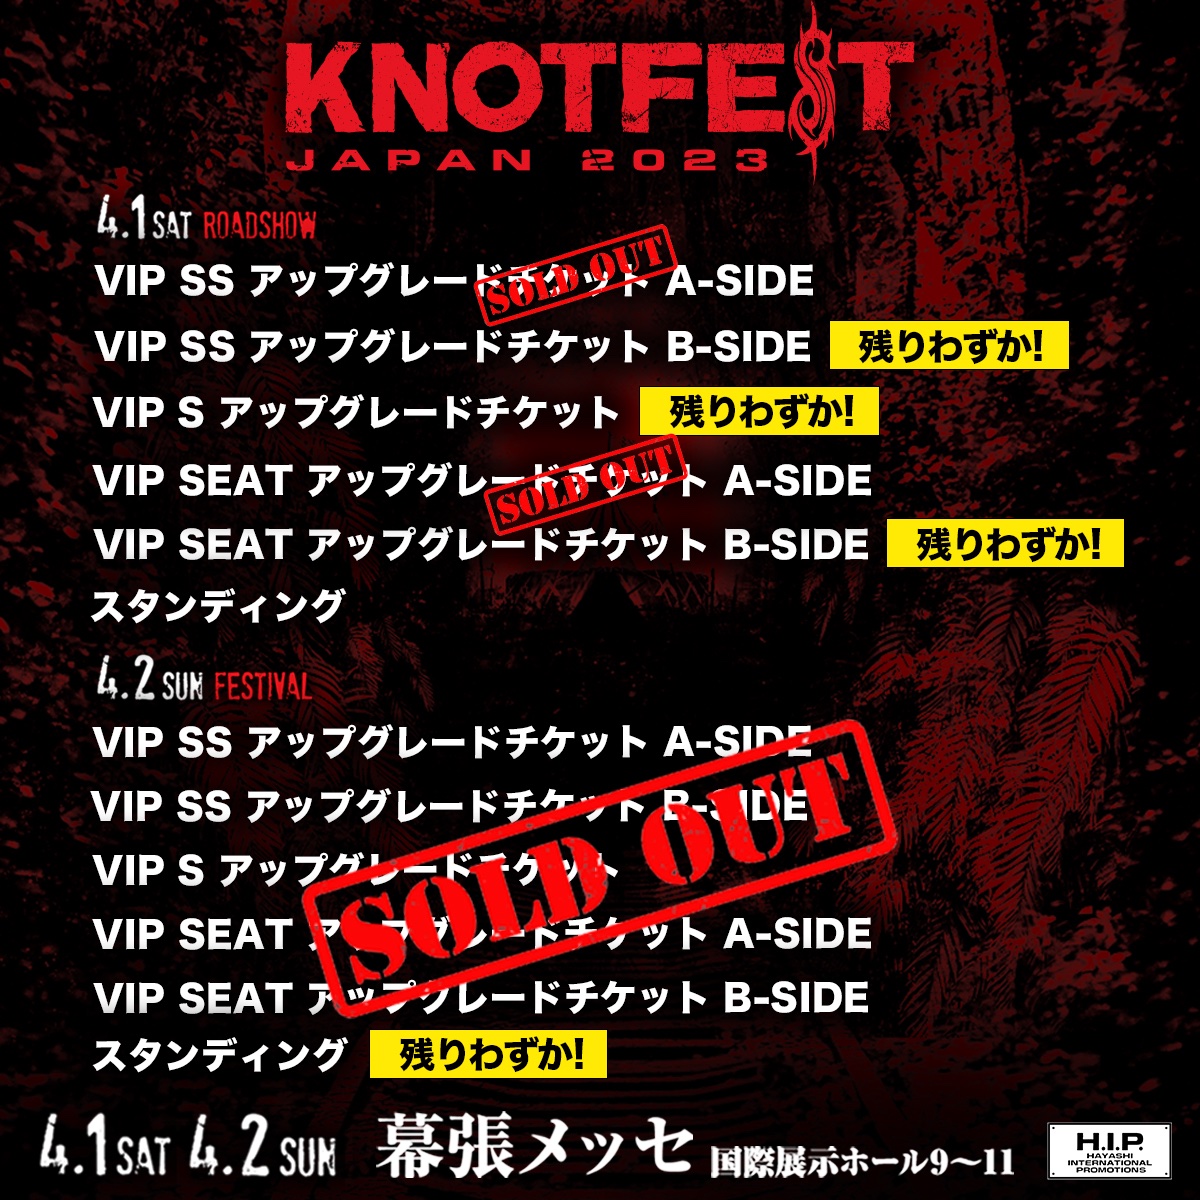 KNOTFEST JAPAN 2023 DAY2 FESTIVAL  最新